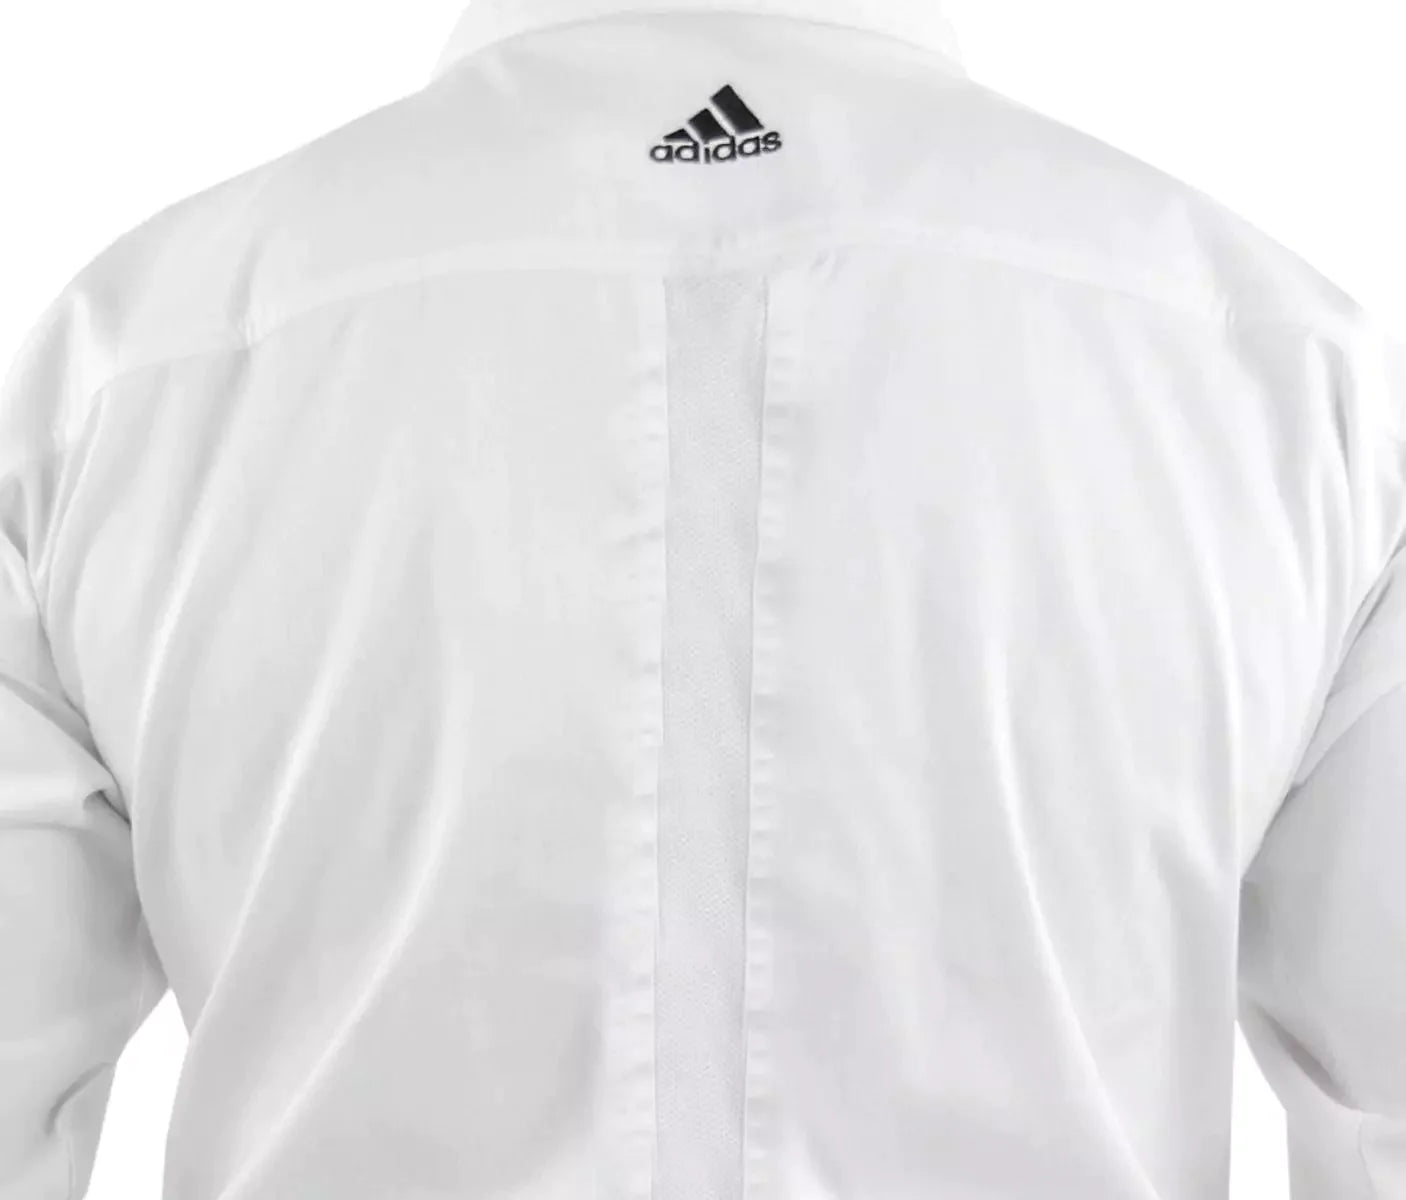 Adidas Adult Karate Club Suit - White  Fight Co